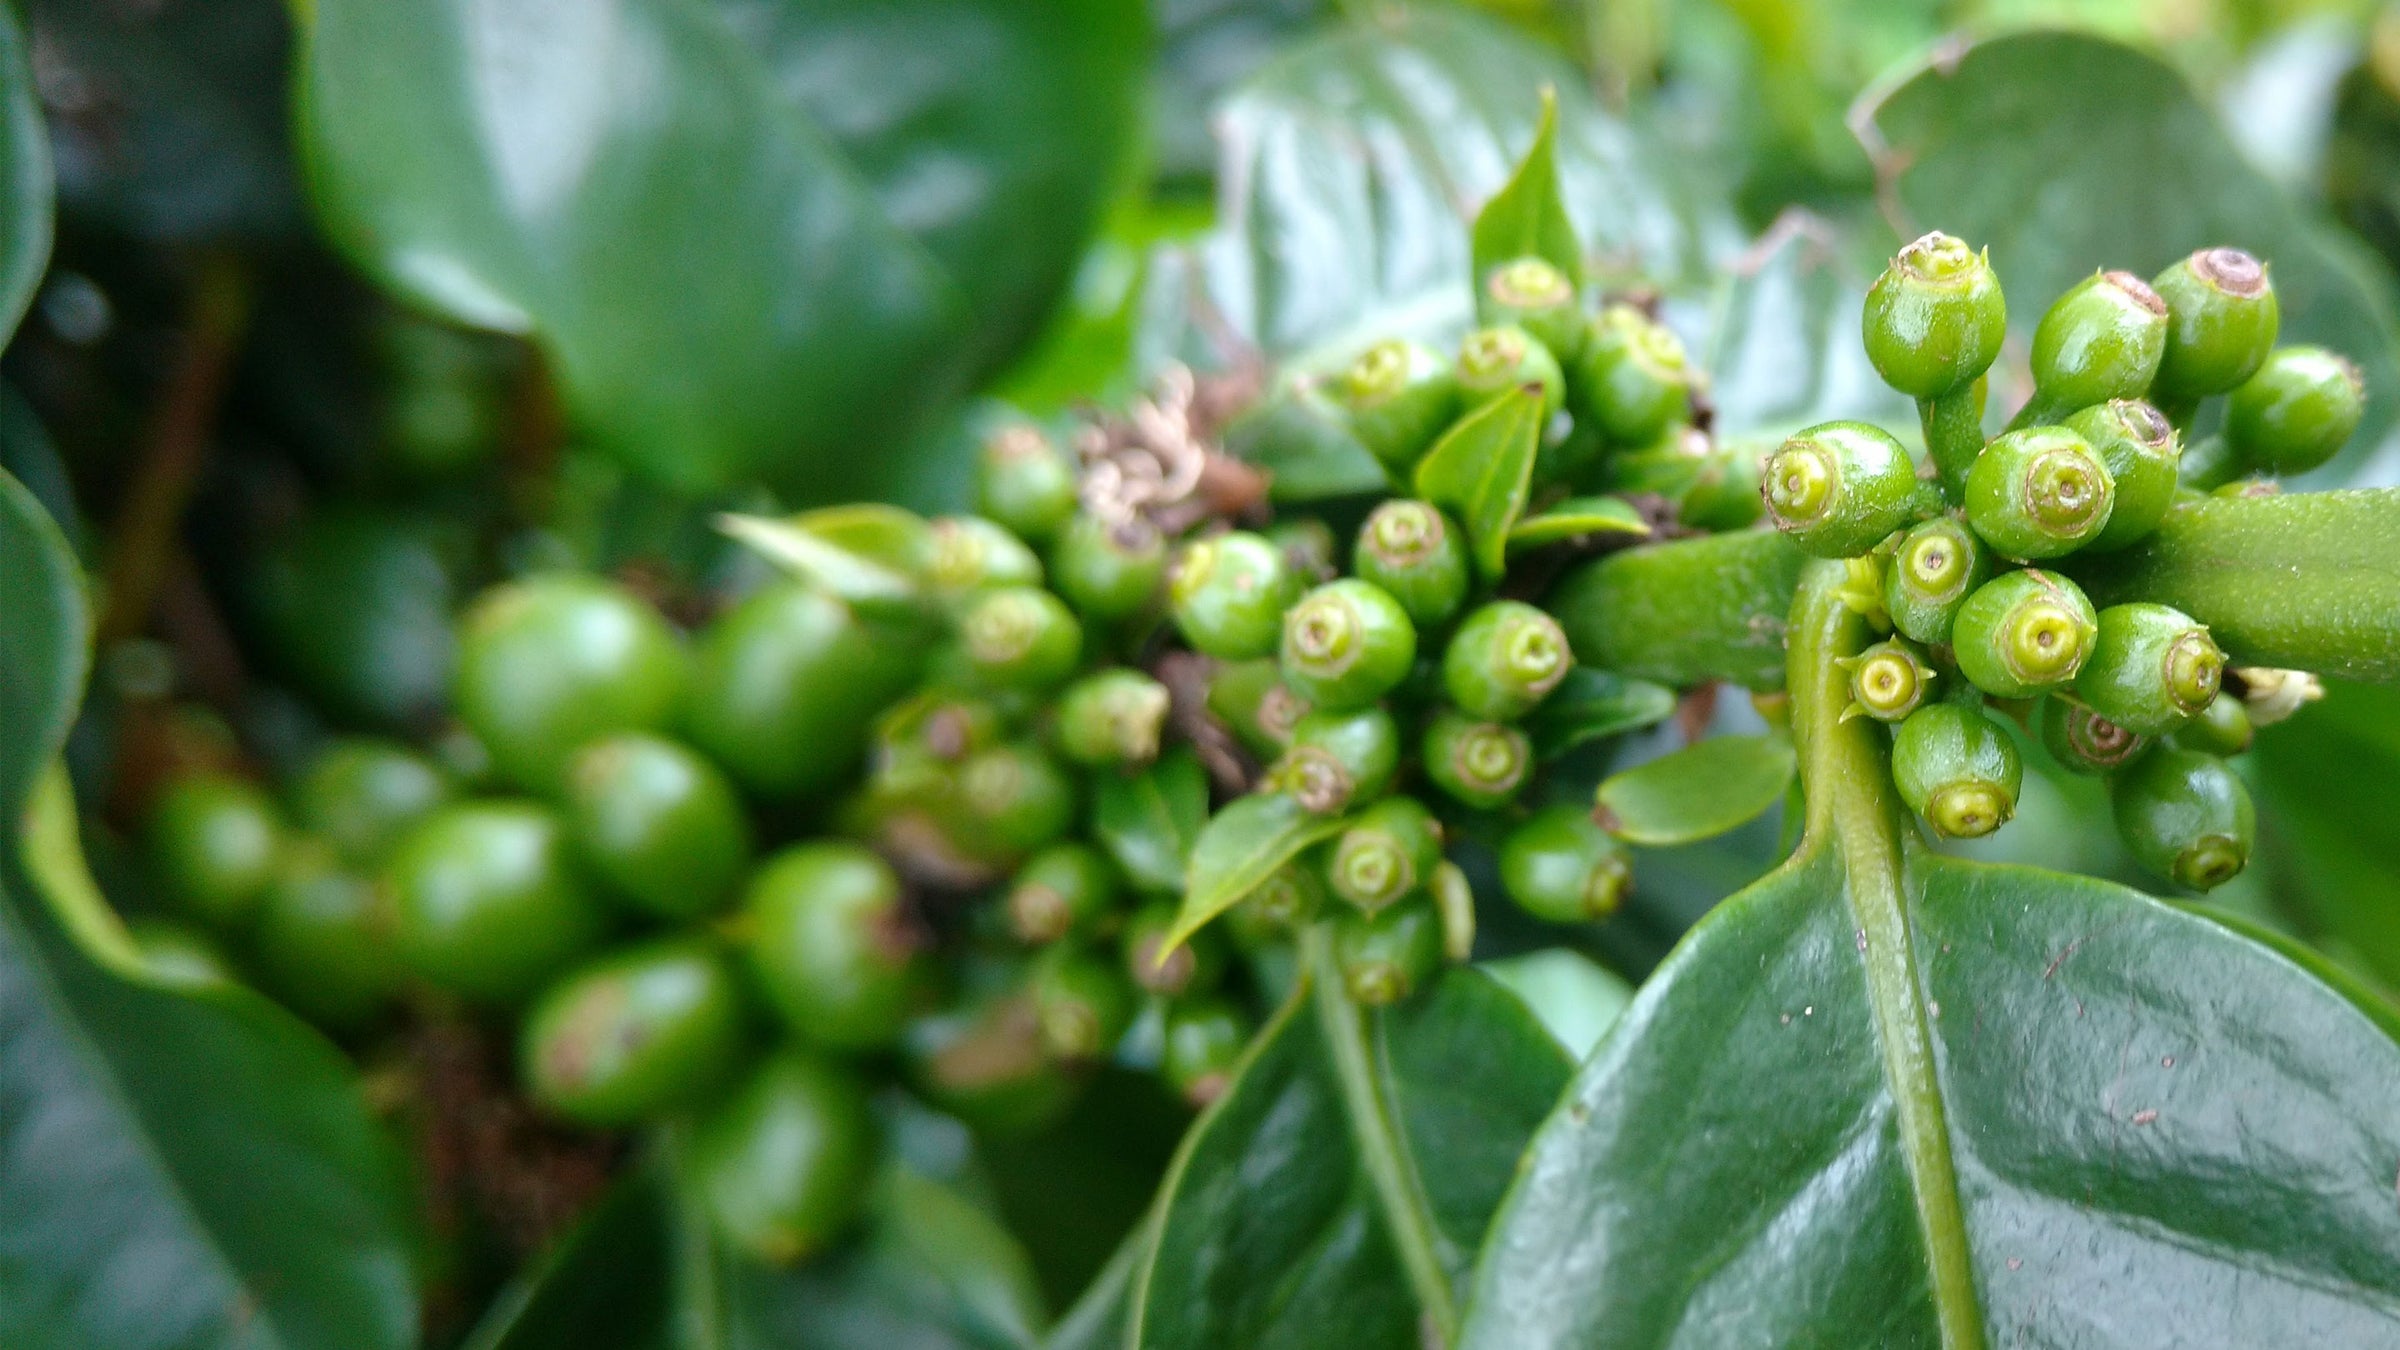 Close-up image of branch of unripe coffee fruit / cherries.